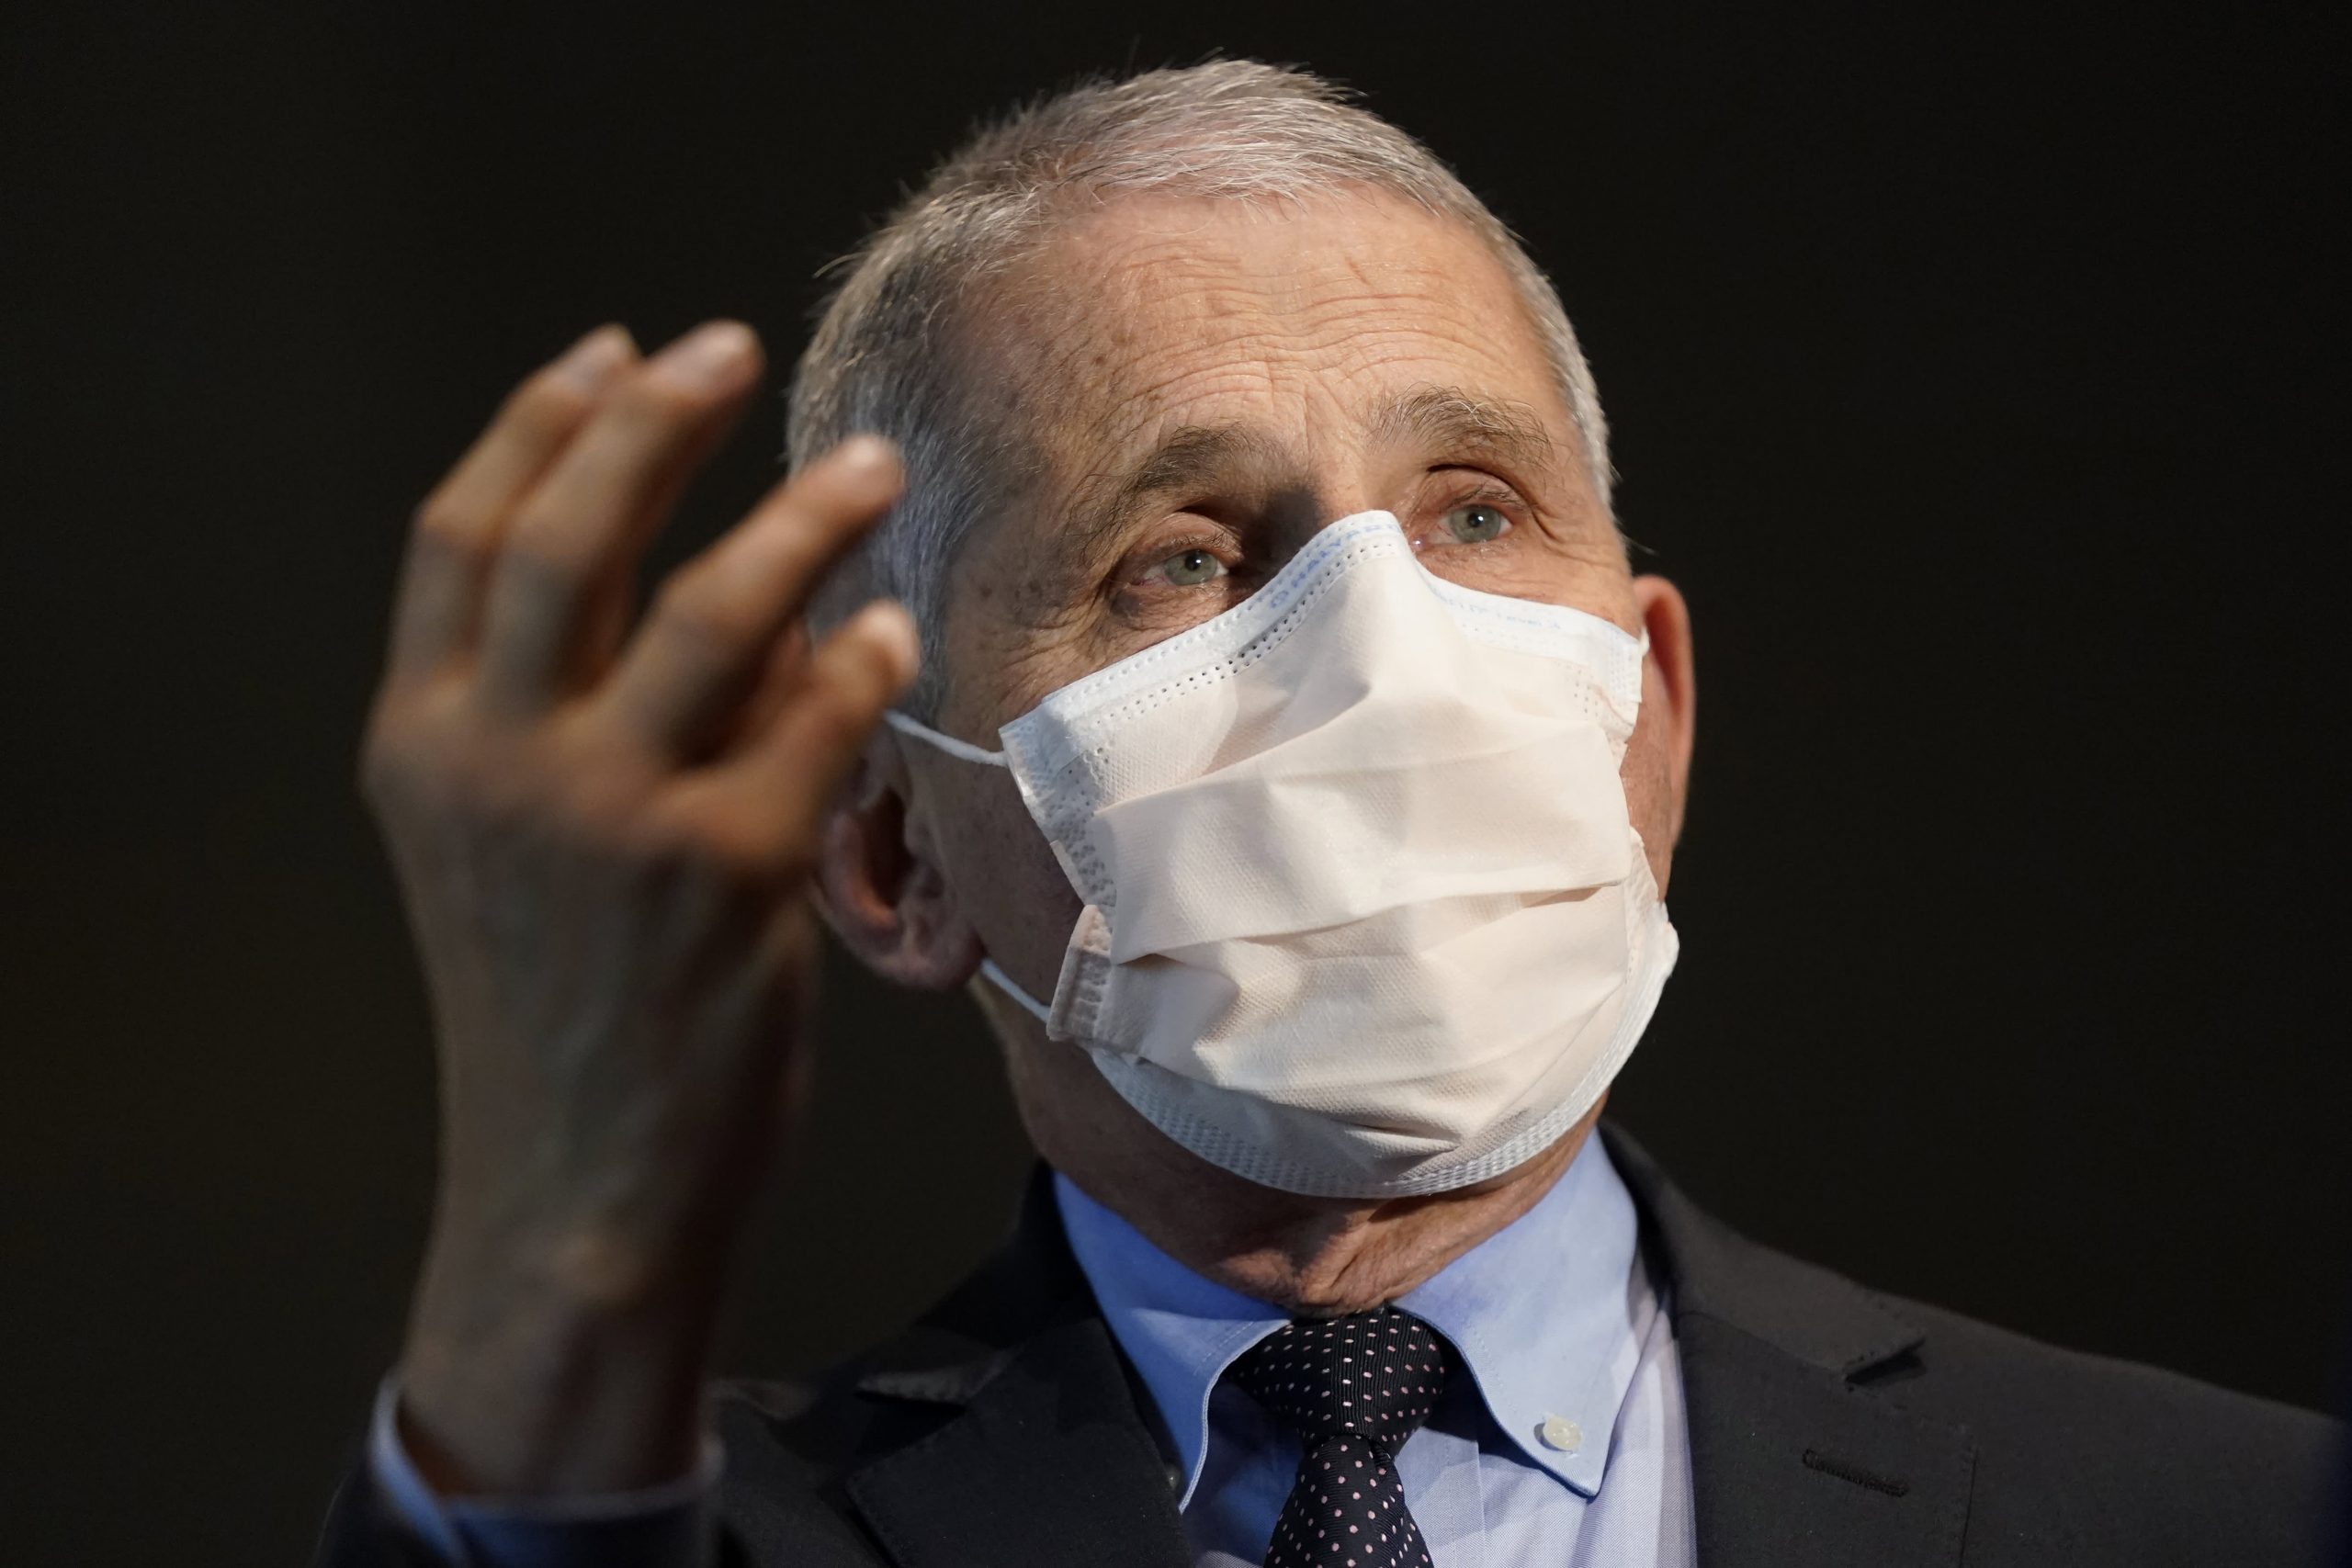 Dr. Fauci says sluggish Covid vaccine rollout has been ‘disappointing’